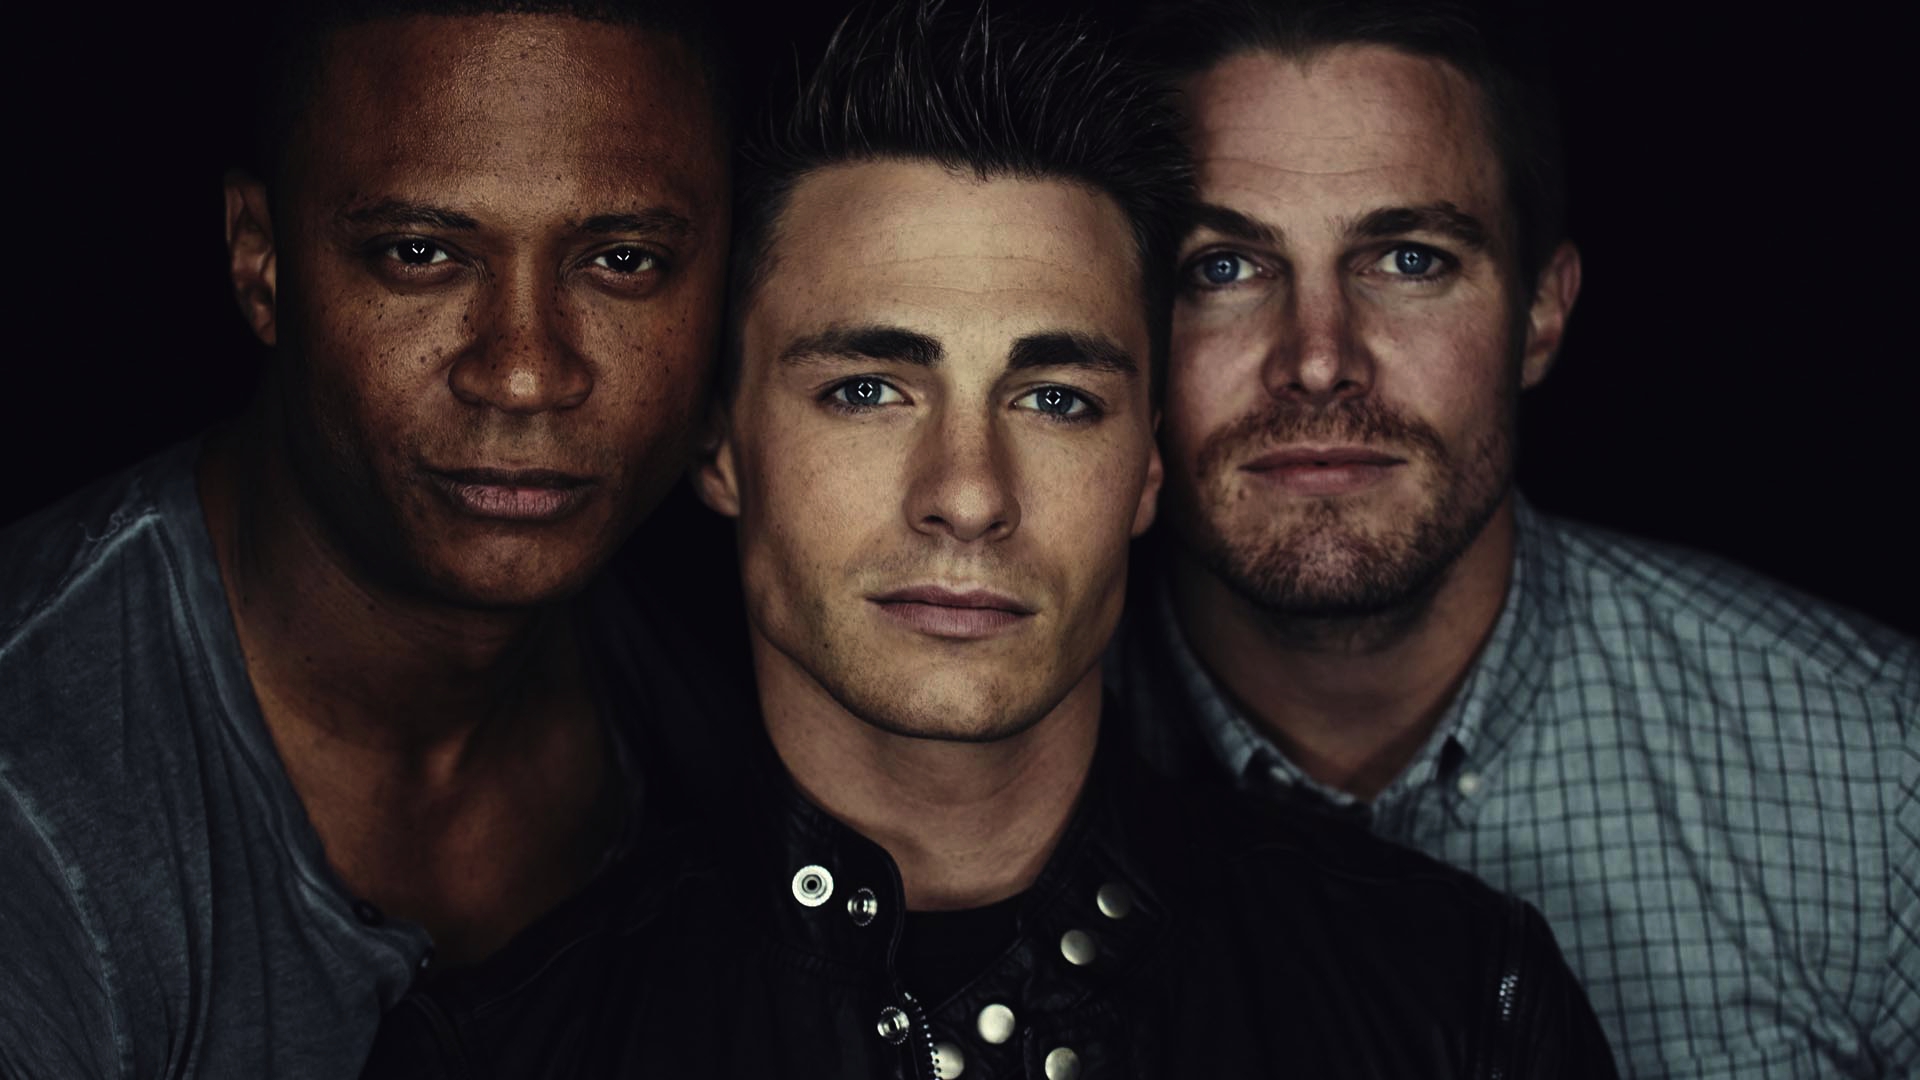 Stephen Amell And Colton Haynes - HD Wallpaper 